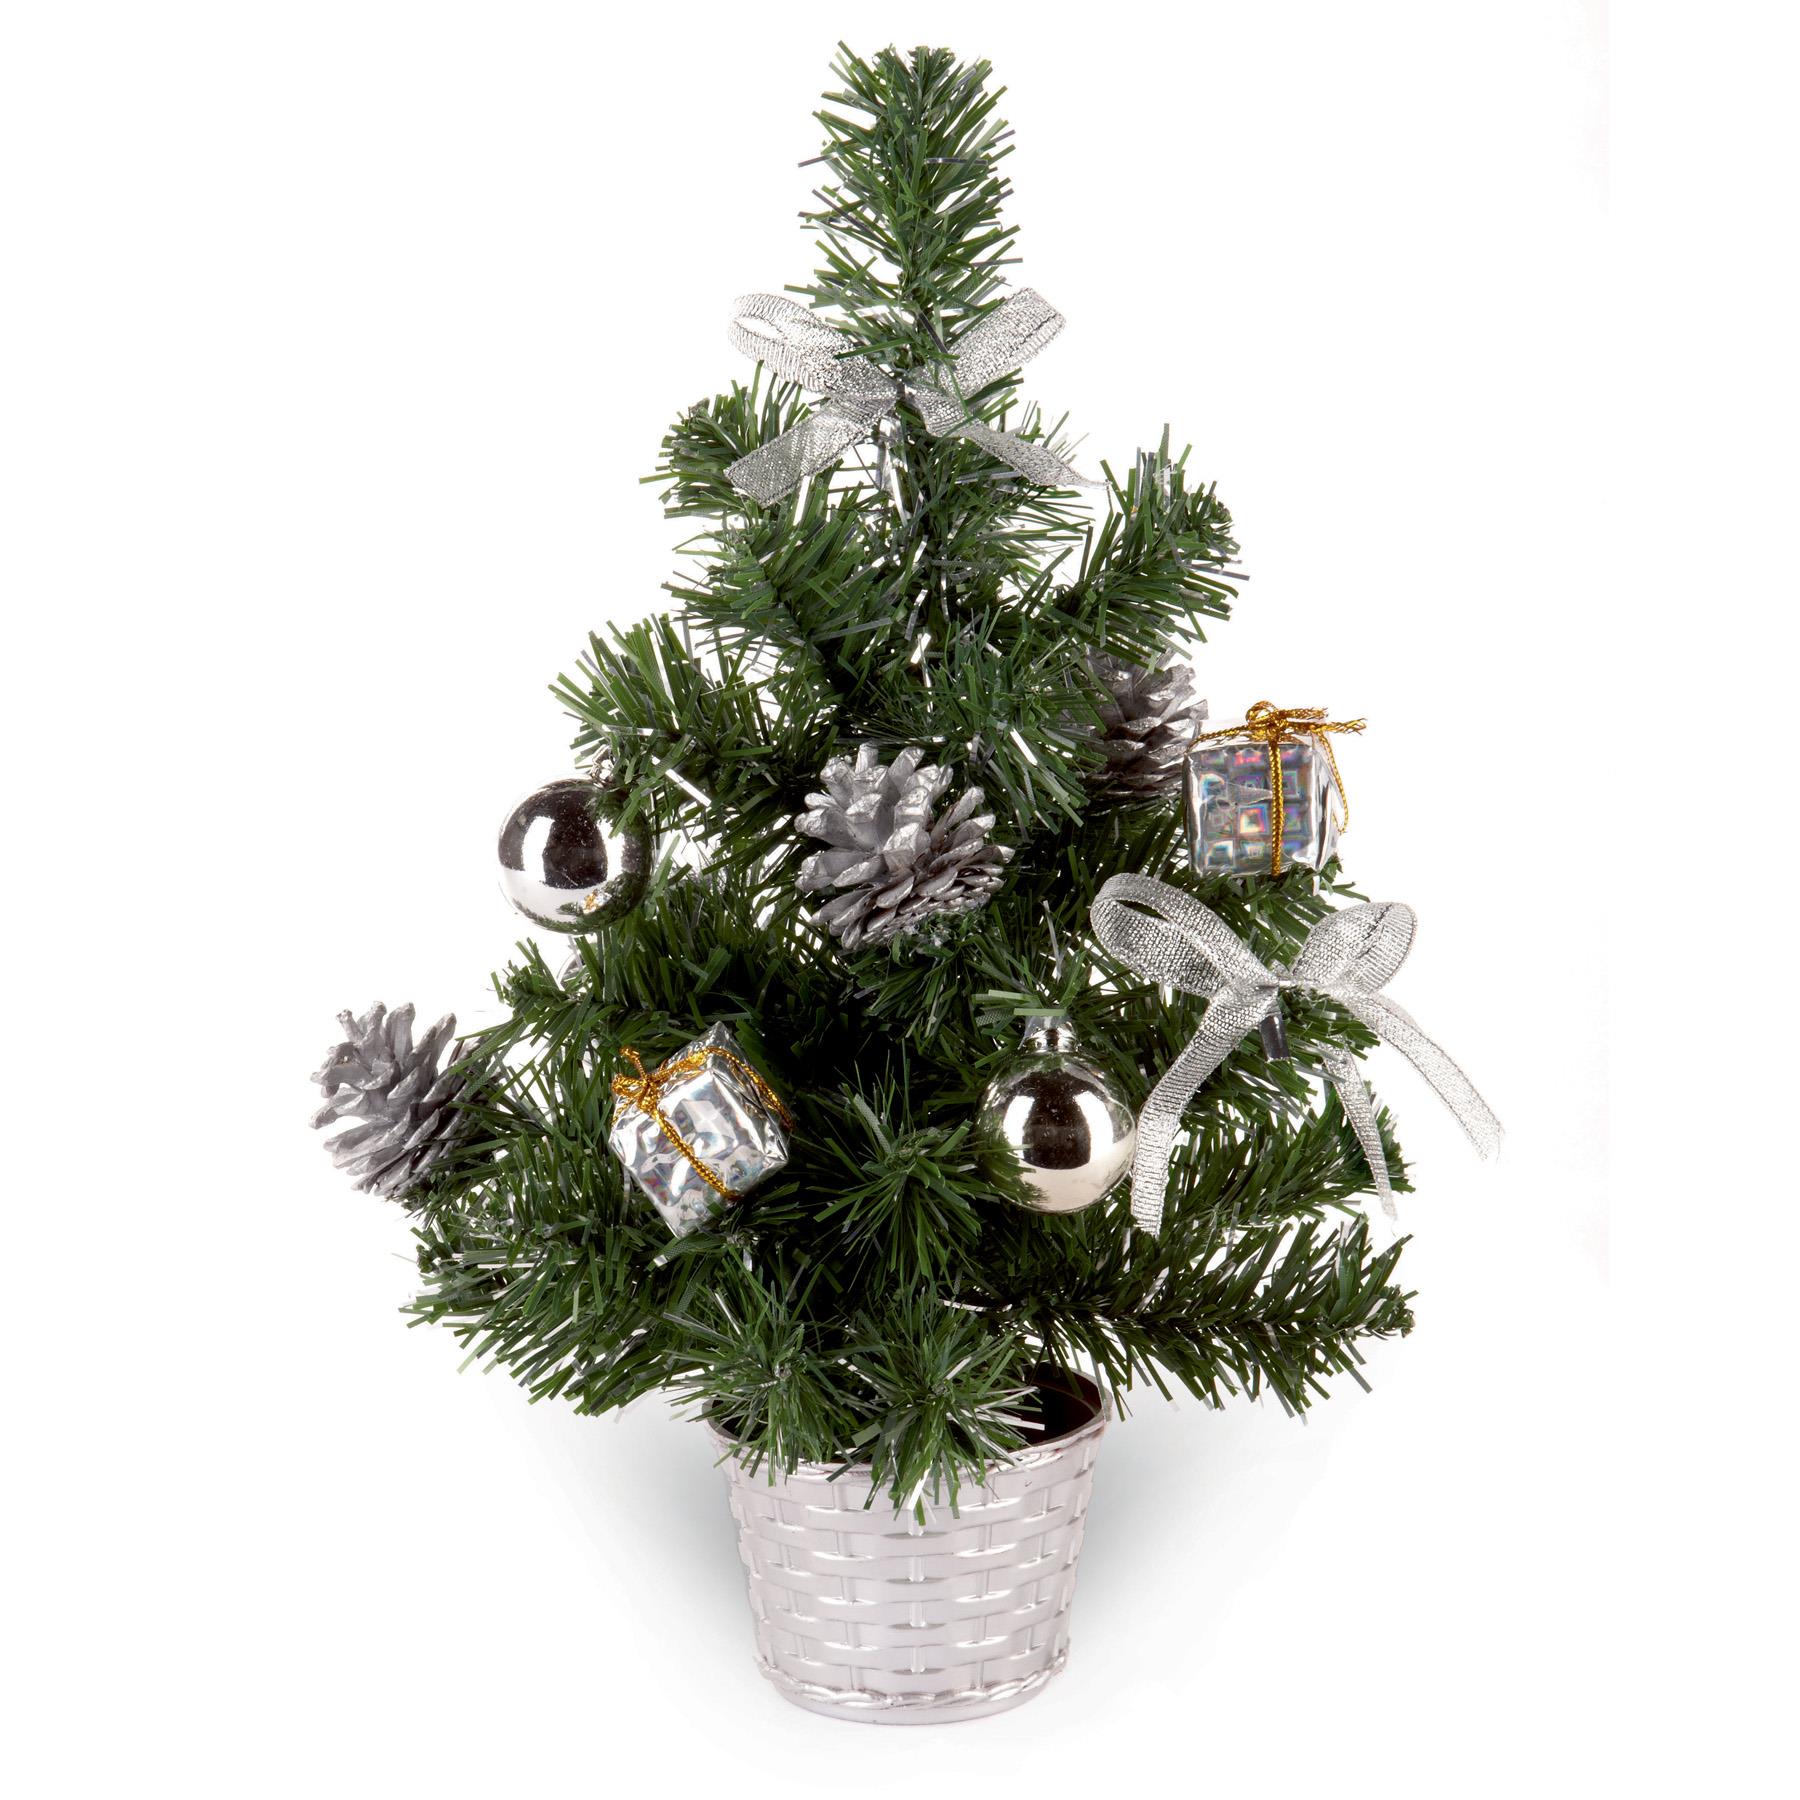 30cm Artificial Christmas Tree with Silver Tinsel Flecks, Silver Decorations and Pine Cones